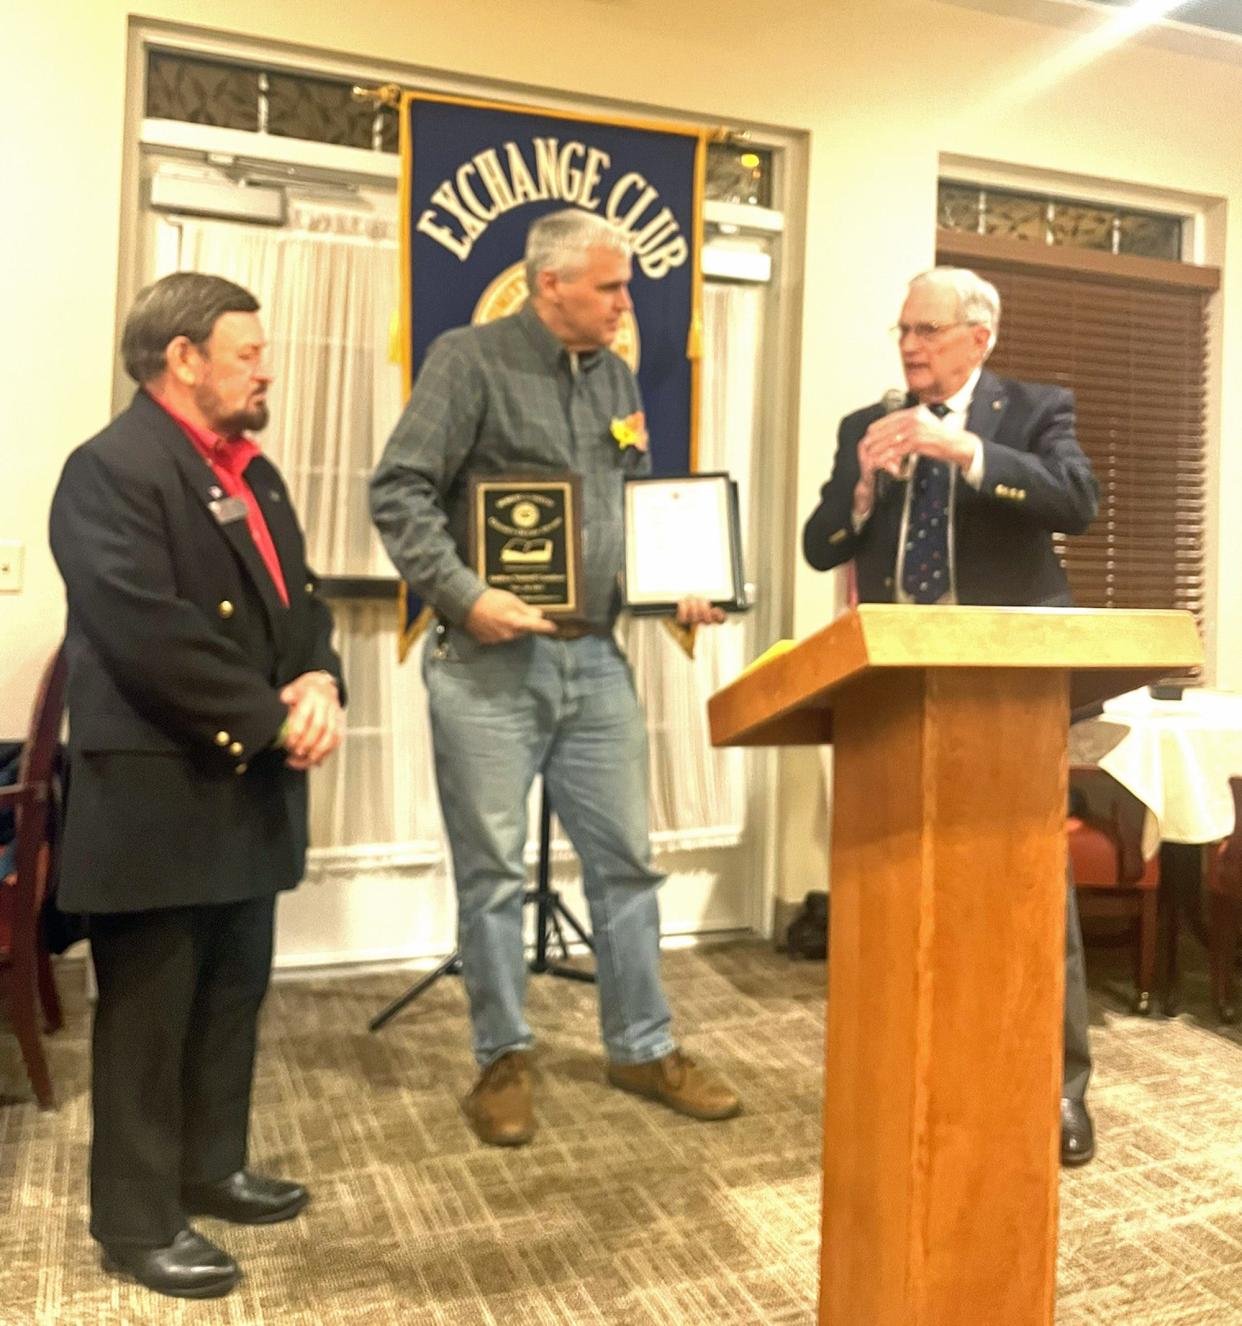 Bryan Goodson accepts the Robert J. Smith Golden Deeds award on behalf of his late wife, Andrea Goodson, during the award banquet on Tuesday, Nov. 28, 2023, at SpiritTrust Lutheran, The Village at Utz Terrace, in West Manheim Township.